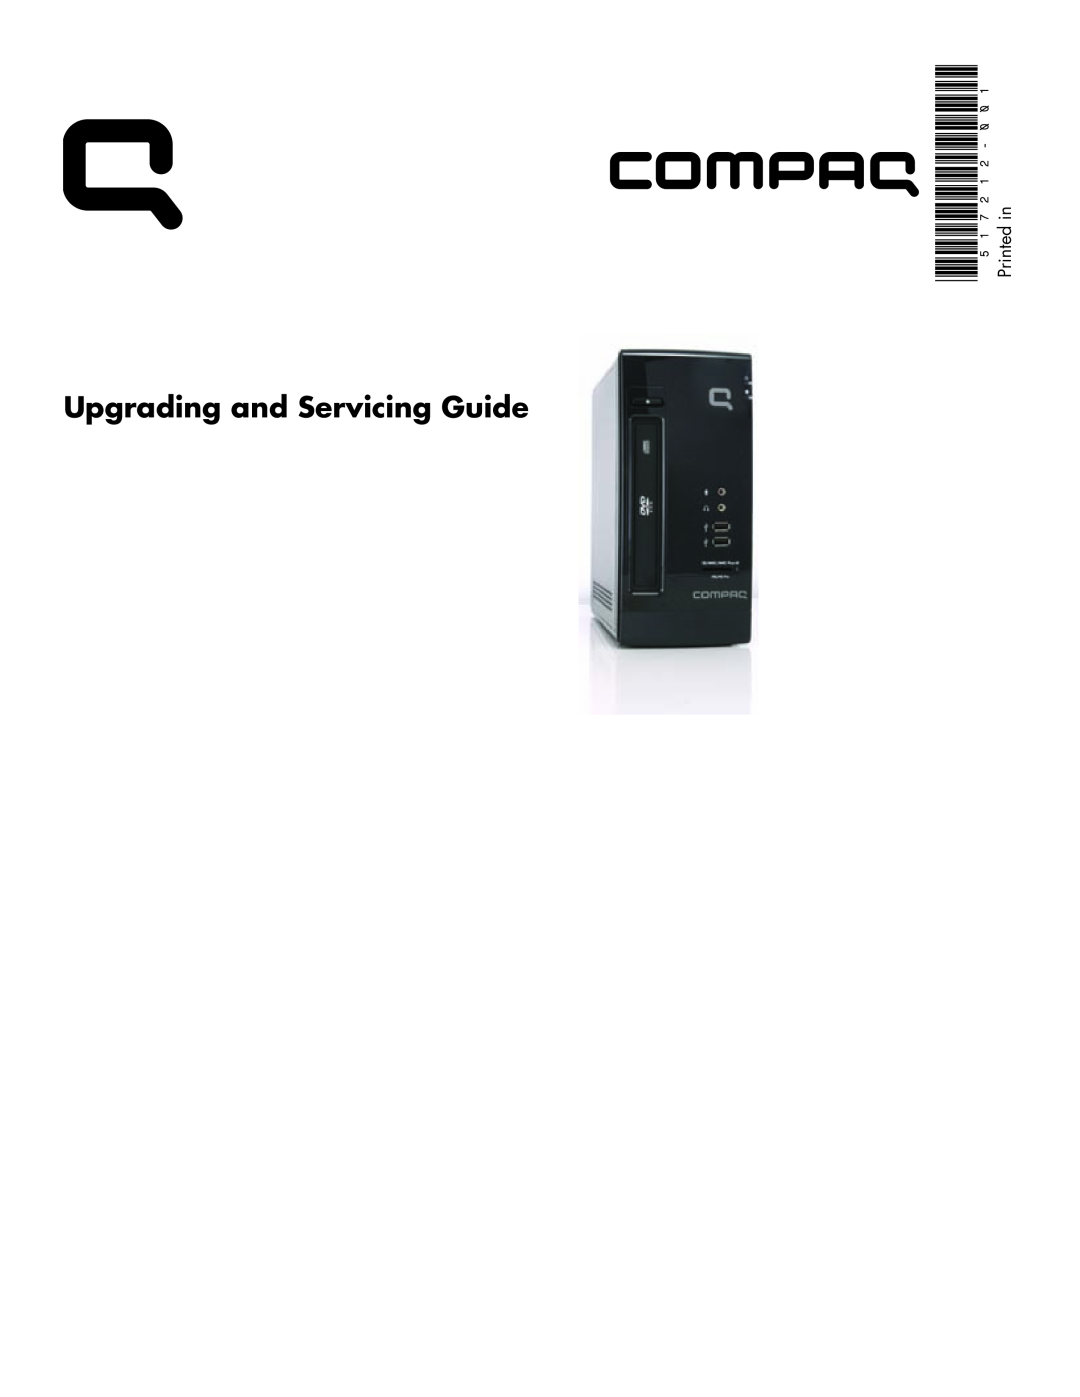 Compaq 517212-001 manual Upgrading and Servicing Guide, Printed in 